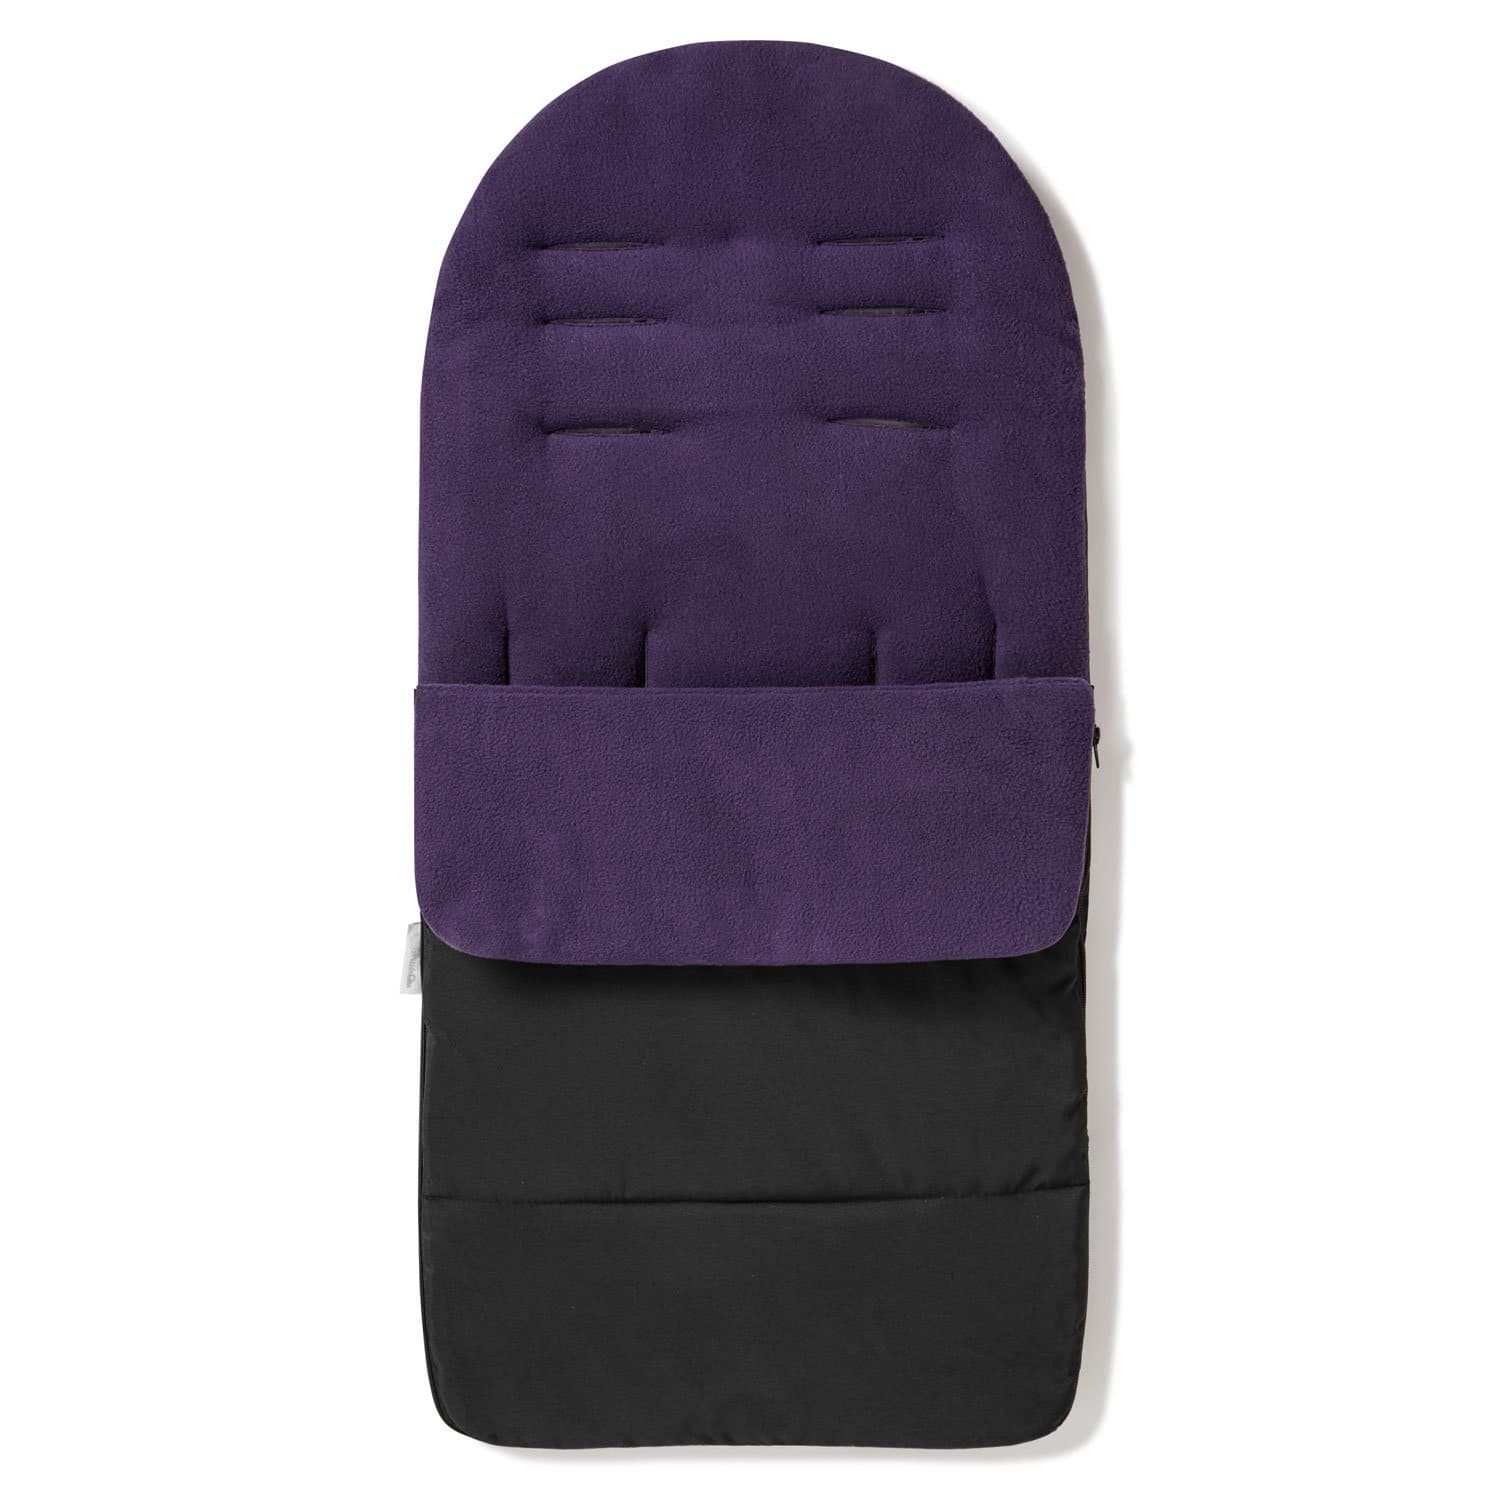 Premium Footmuff / Cosy Toes Compatible with My Child - Plum Purple / Fits All Models | For Your Little One